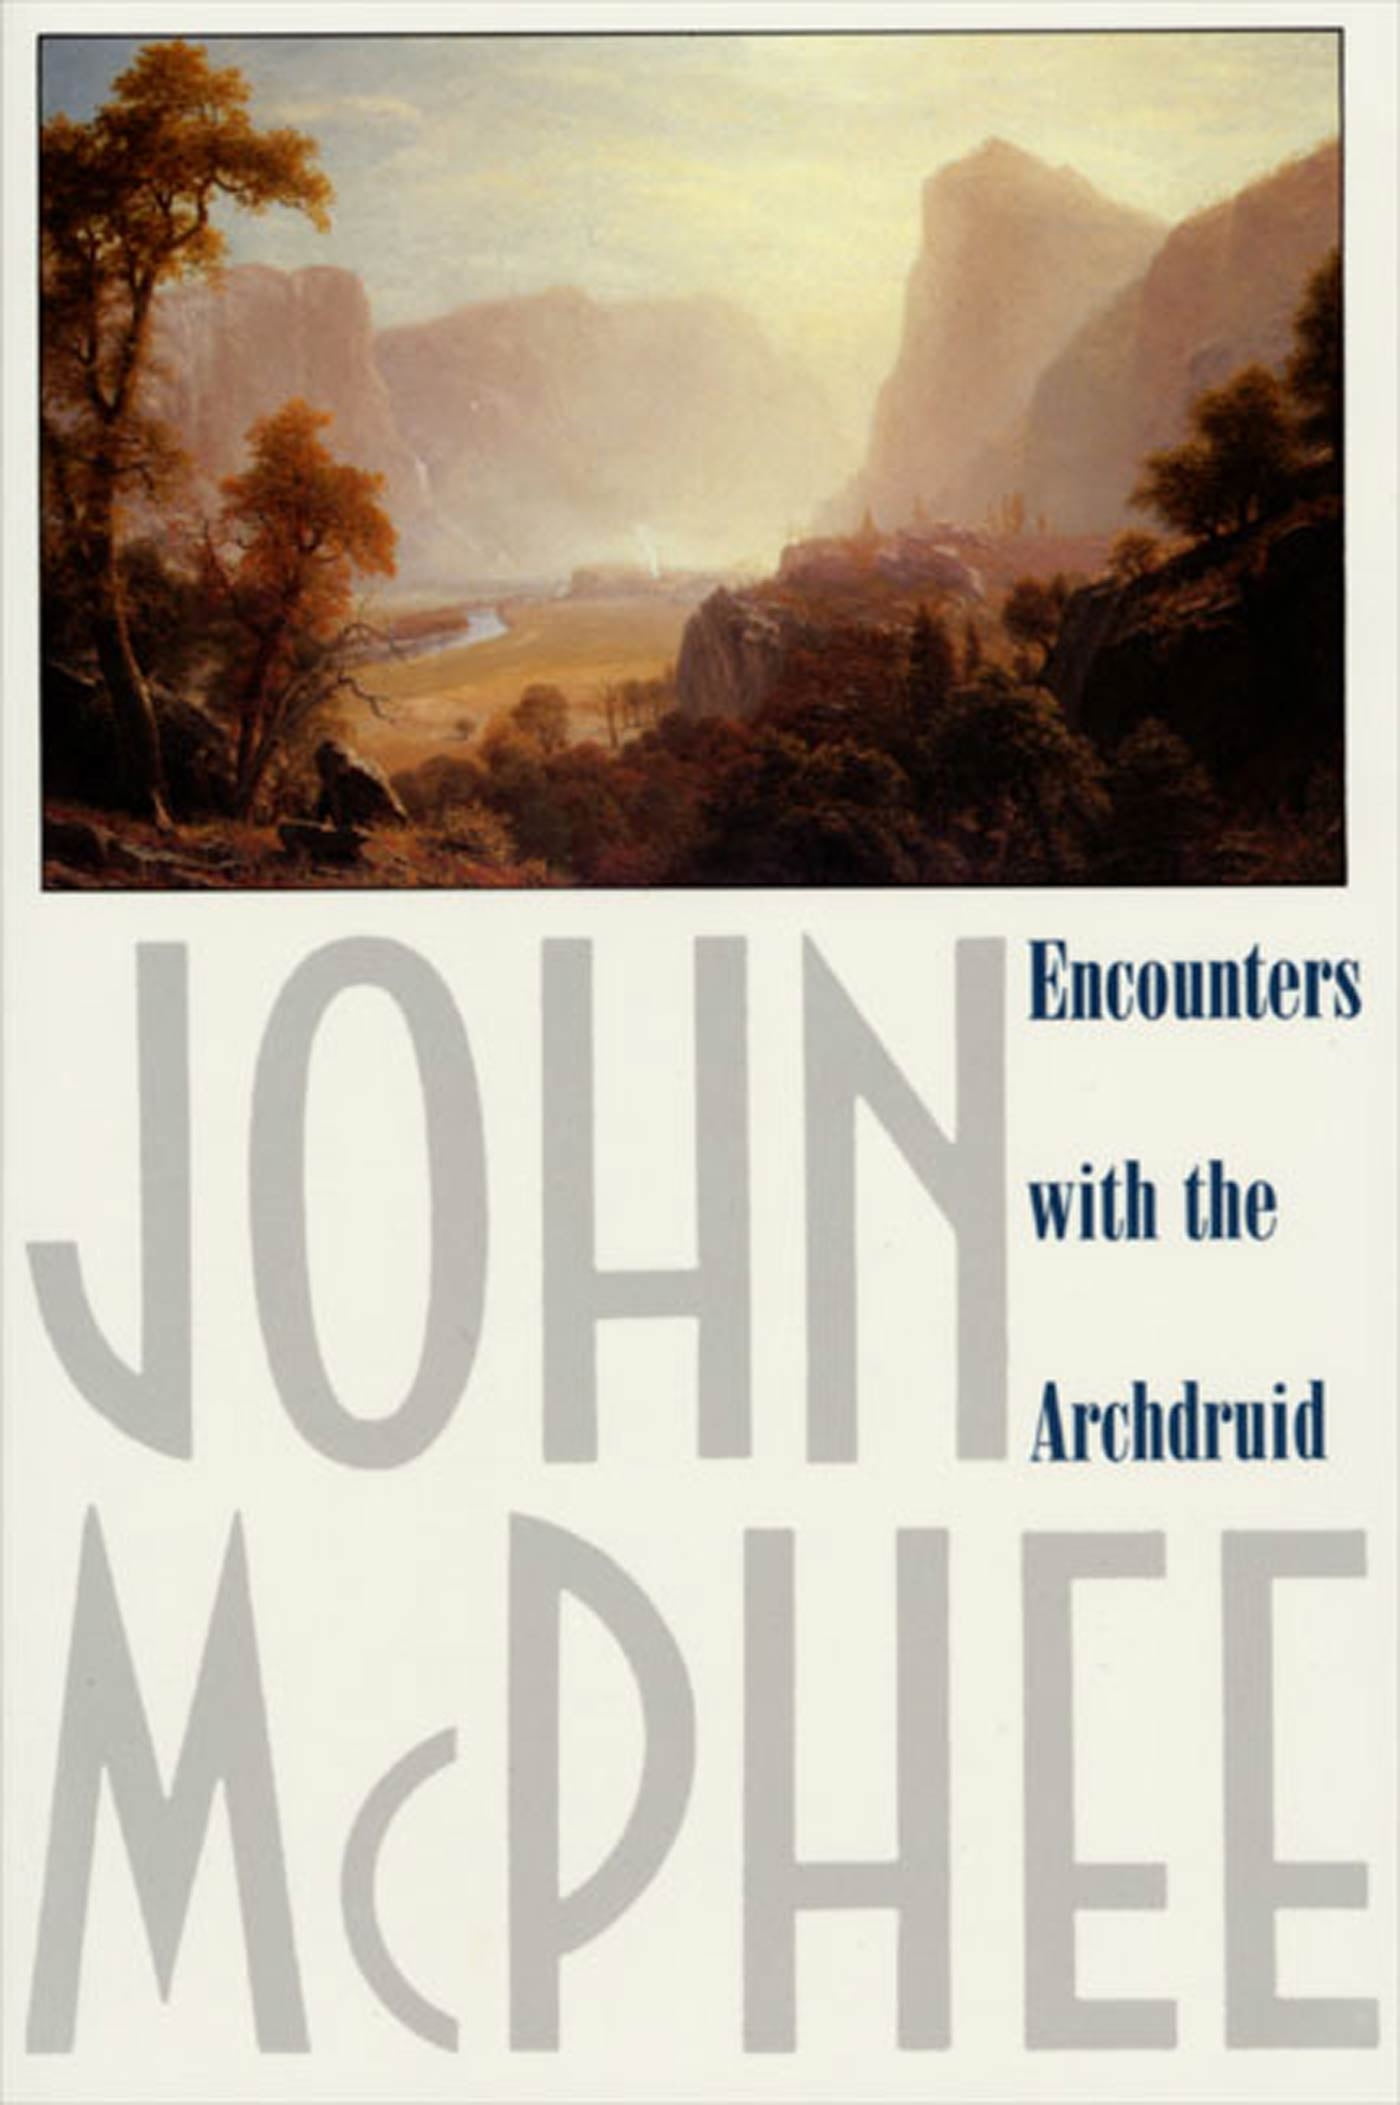 Encounters with the Archdruid Narratives About a Conservationist and
Three of His Natural Enemies Epub-Ebook